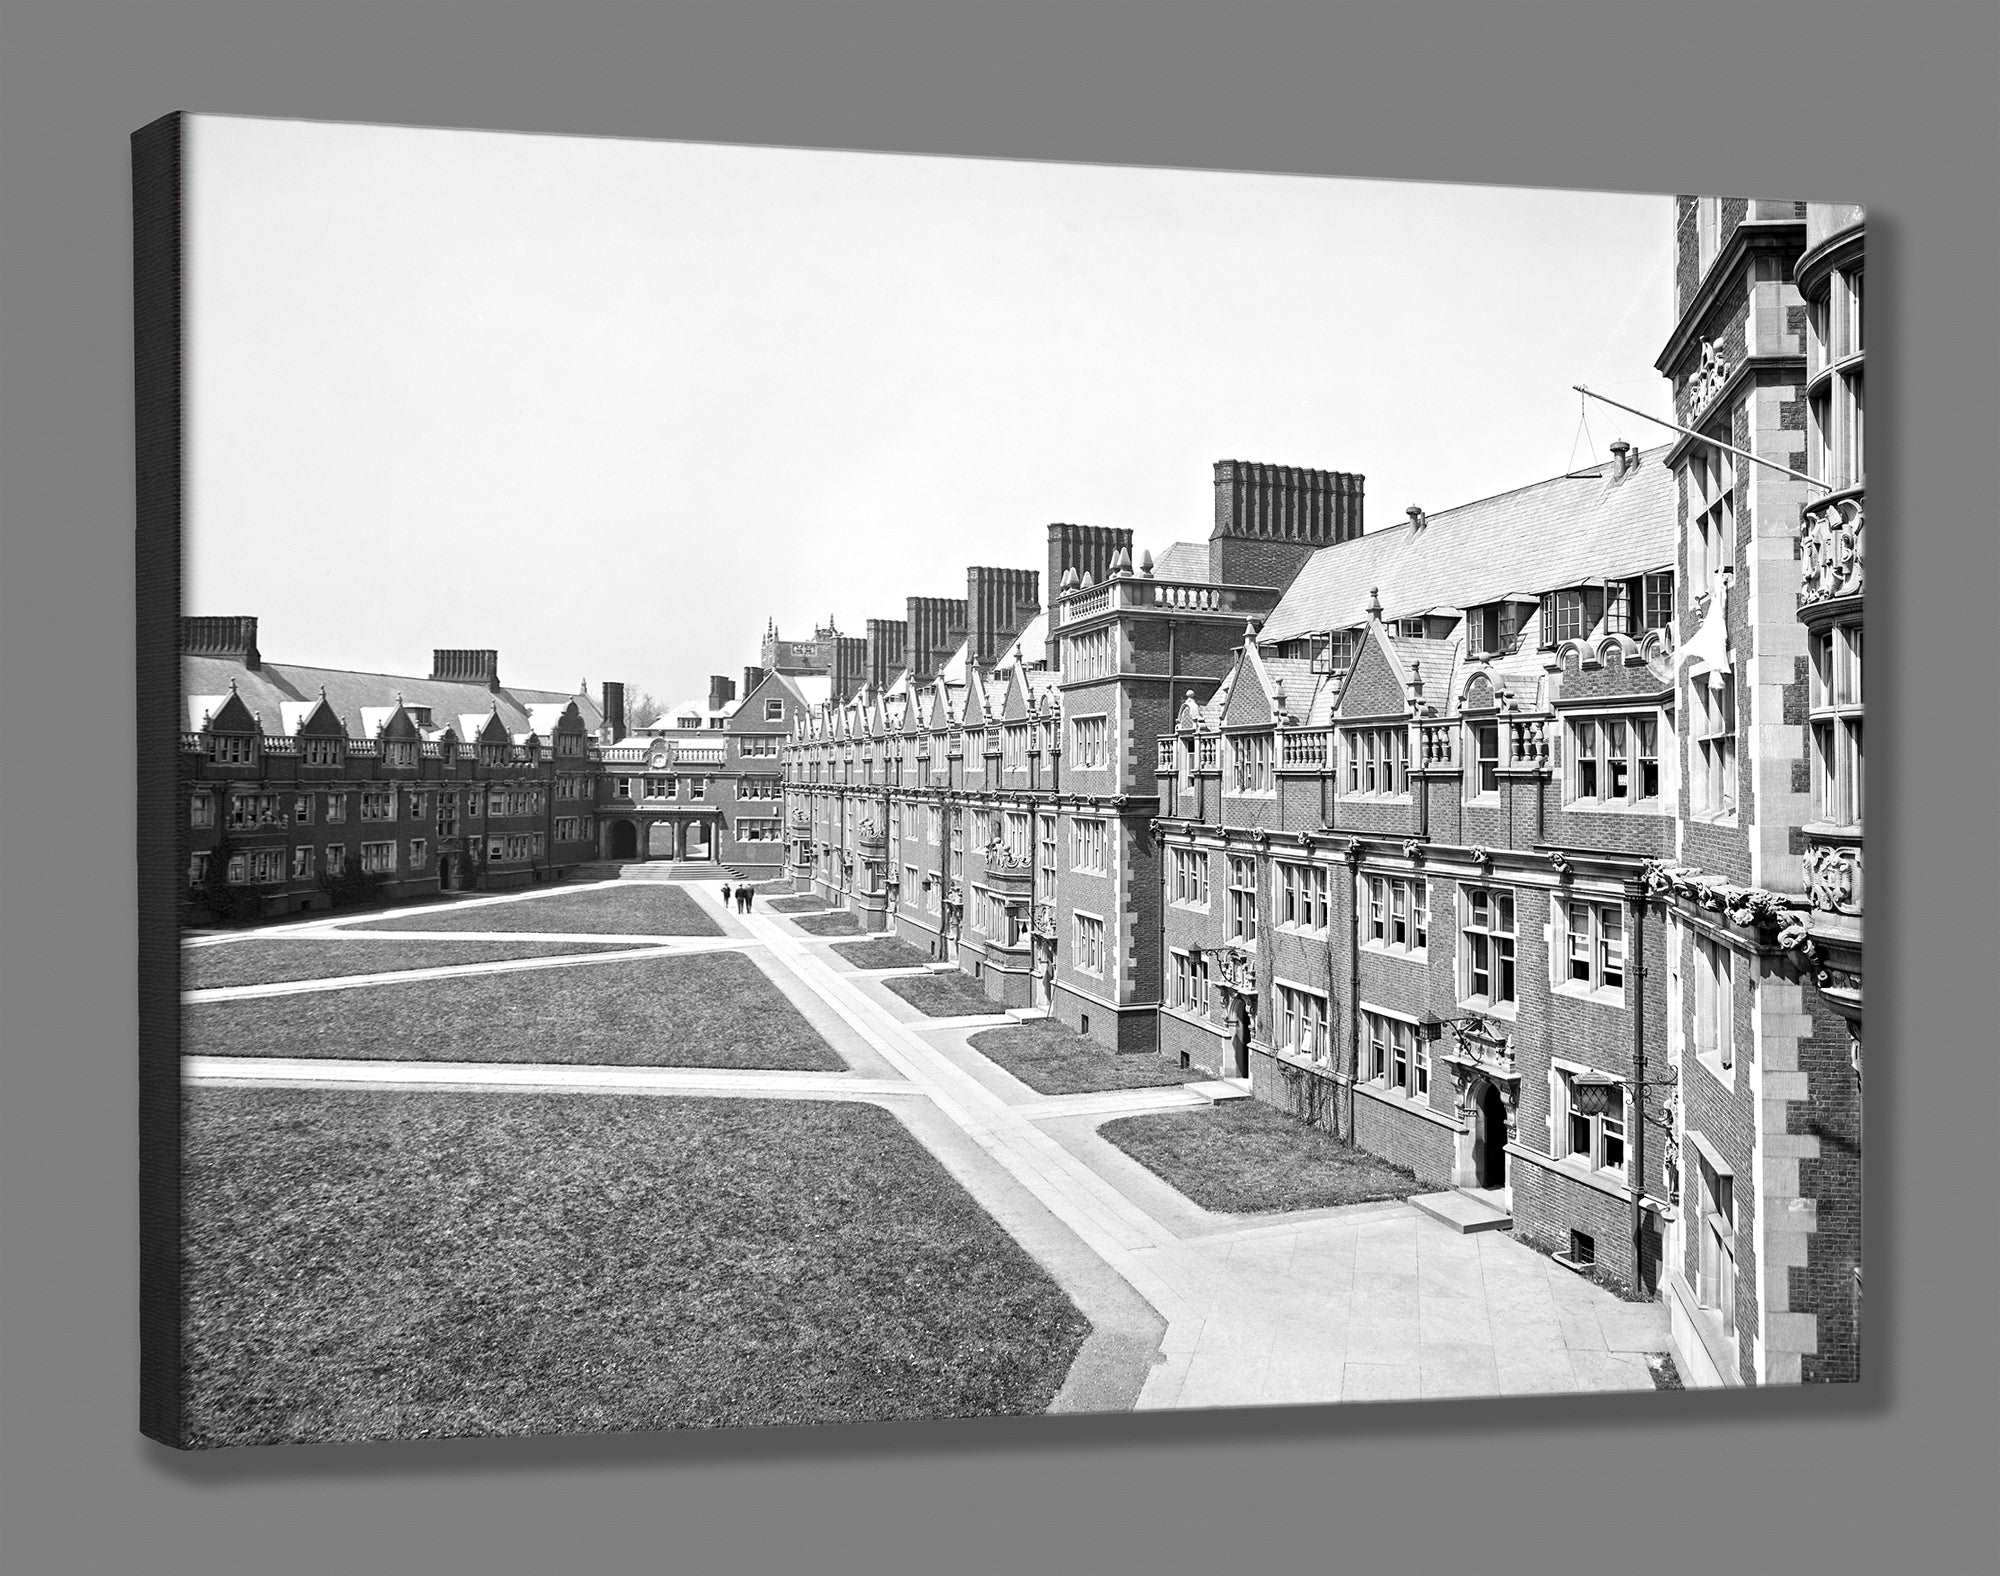 A canvas print reproduction of vintage photography of the University of Pennsylvania